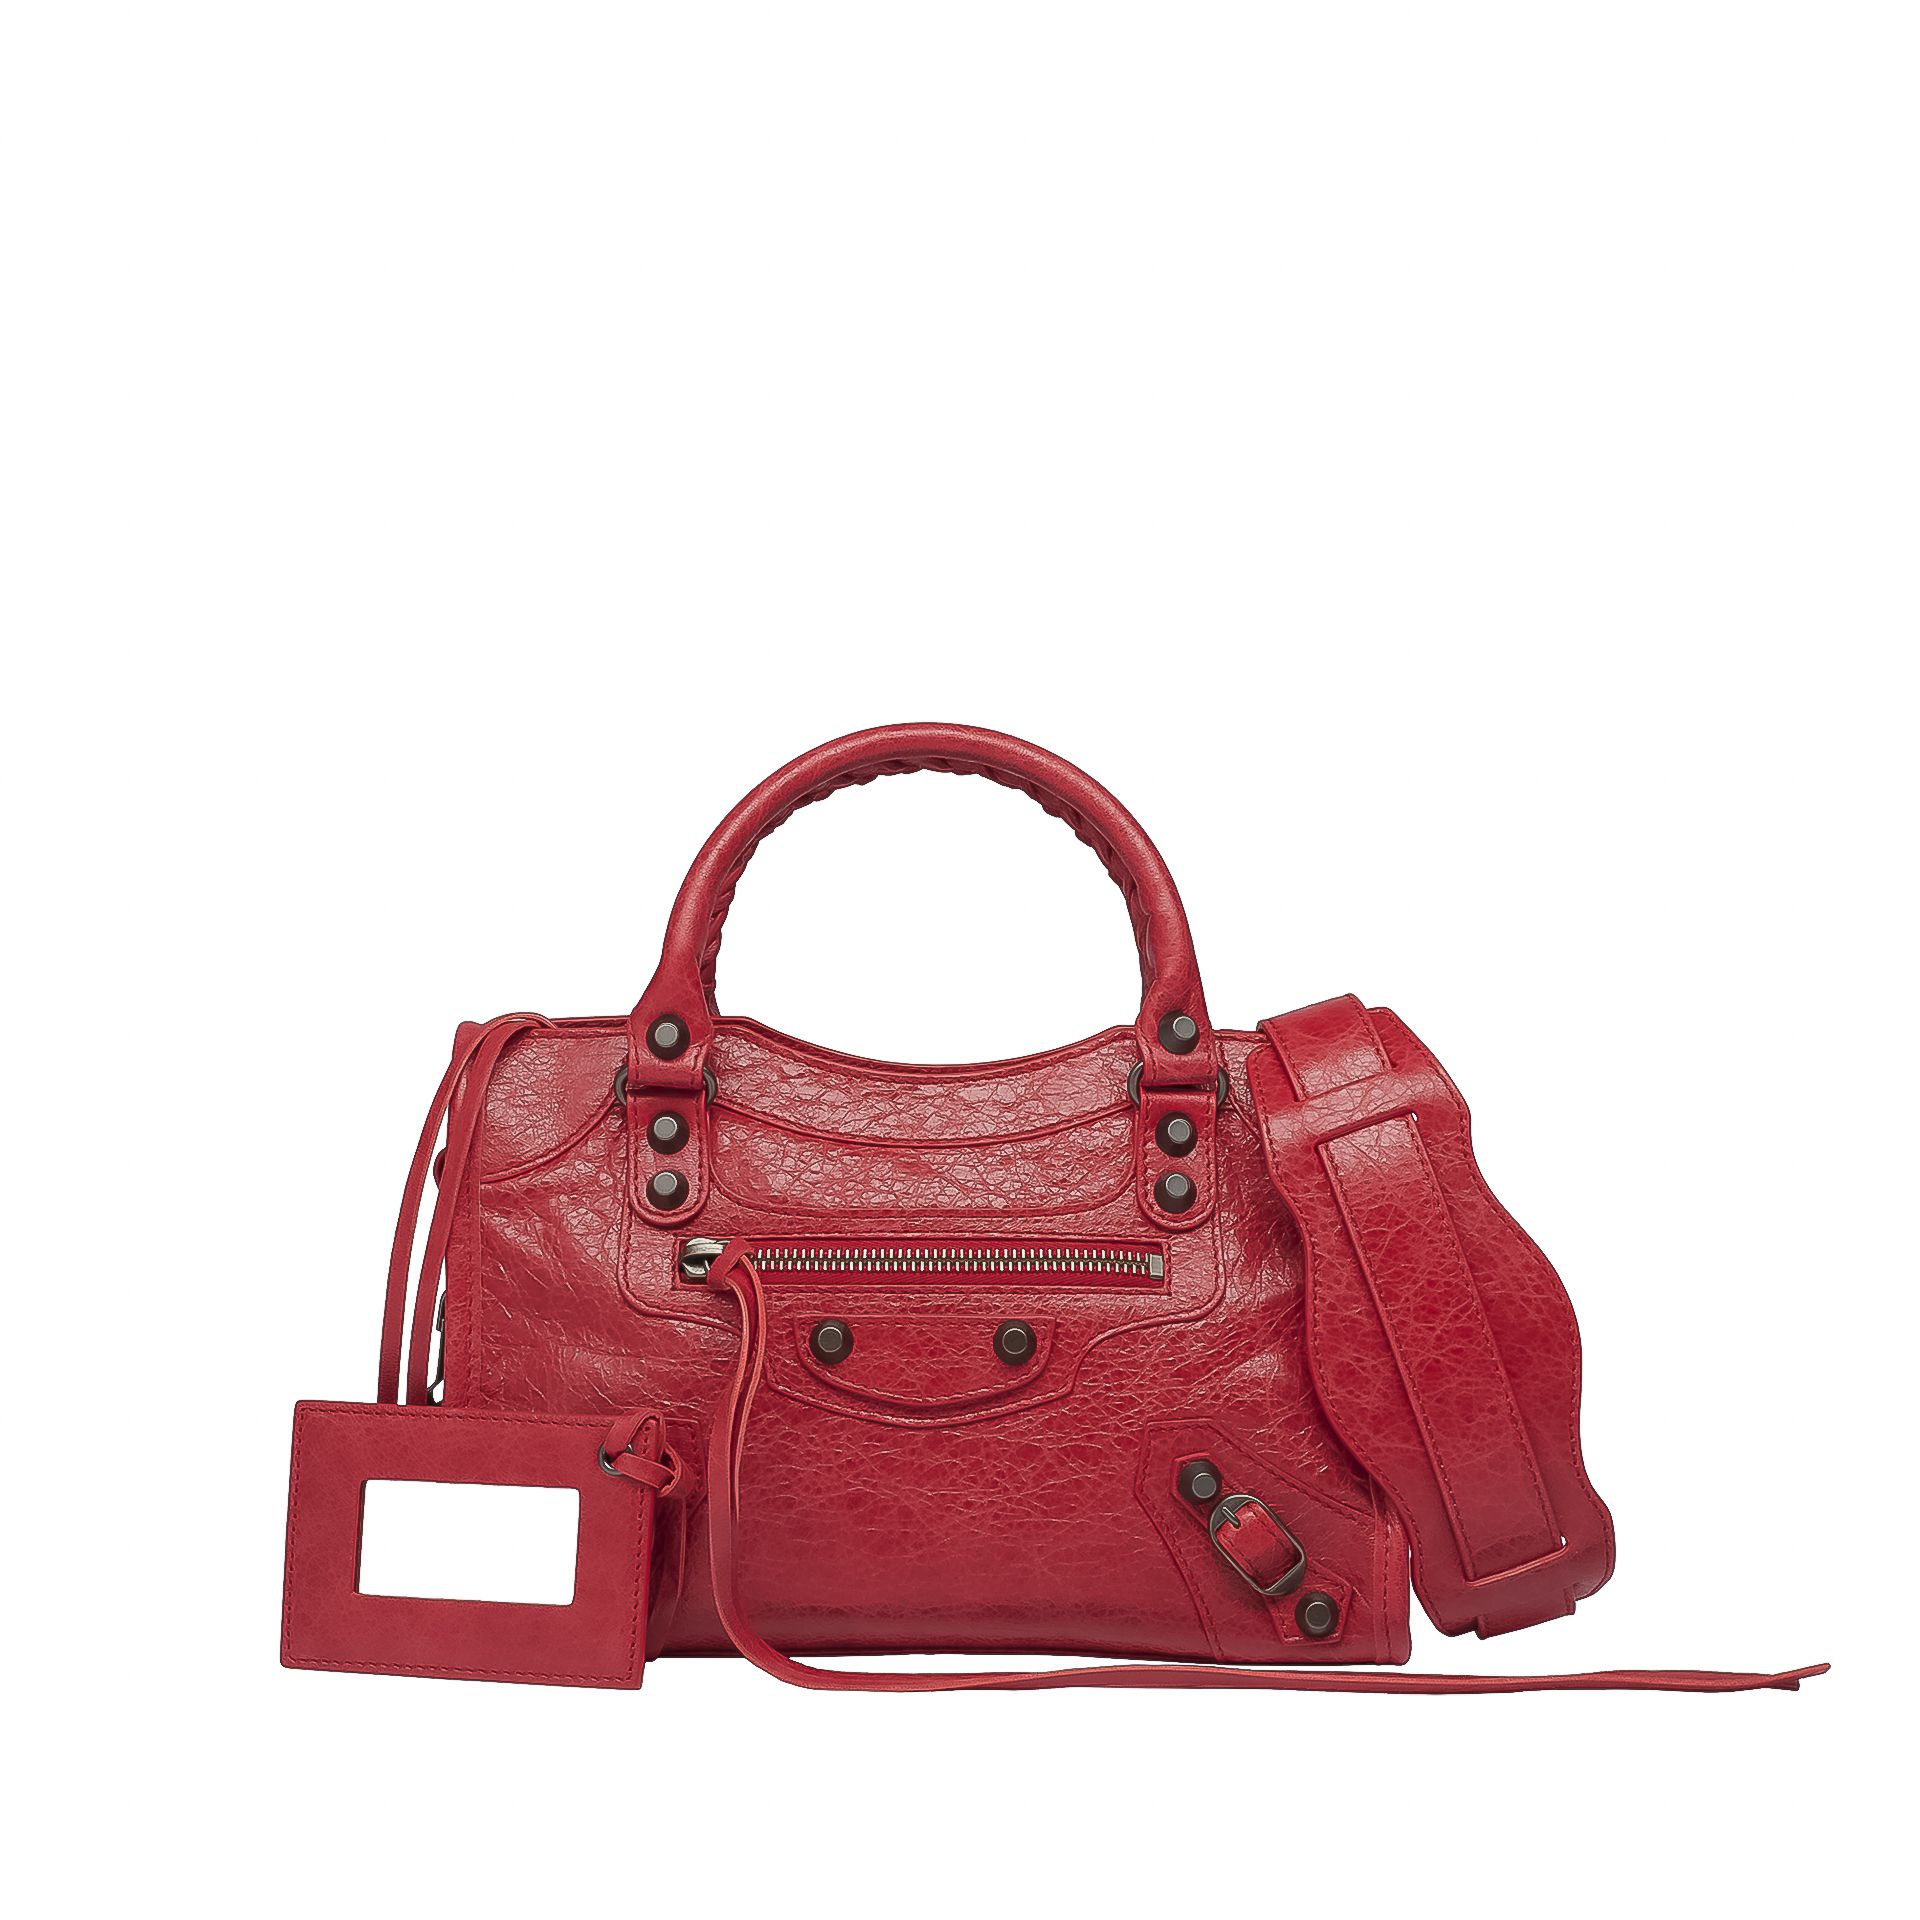 Dele medier Forbyde The Balenciaga Mini City Bag Colors and Styles for Spring / Summer 2014 -  Spotted Fashion